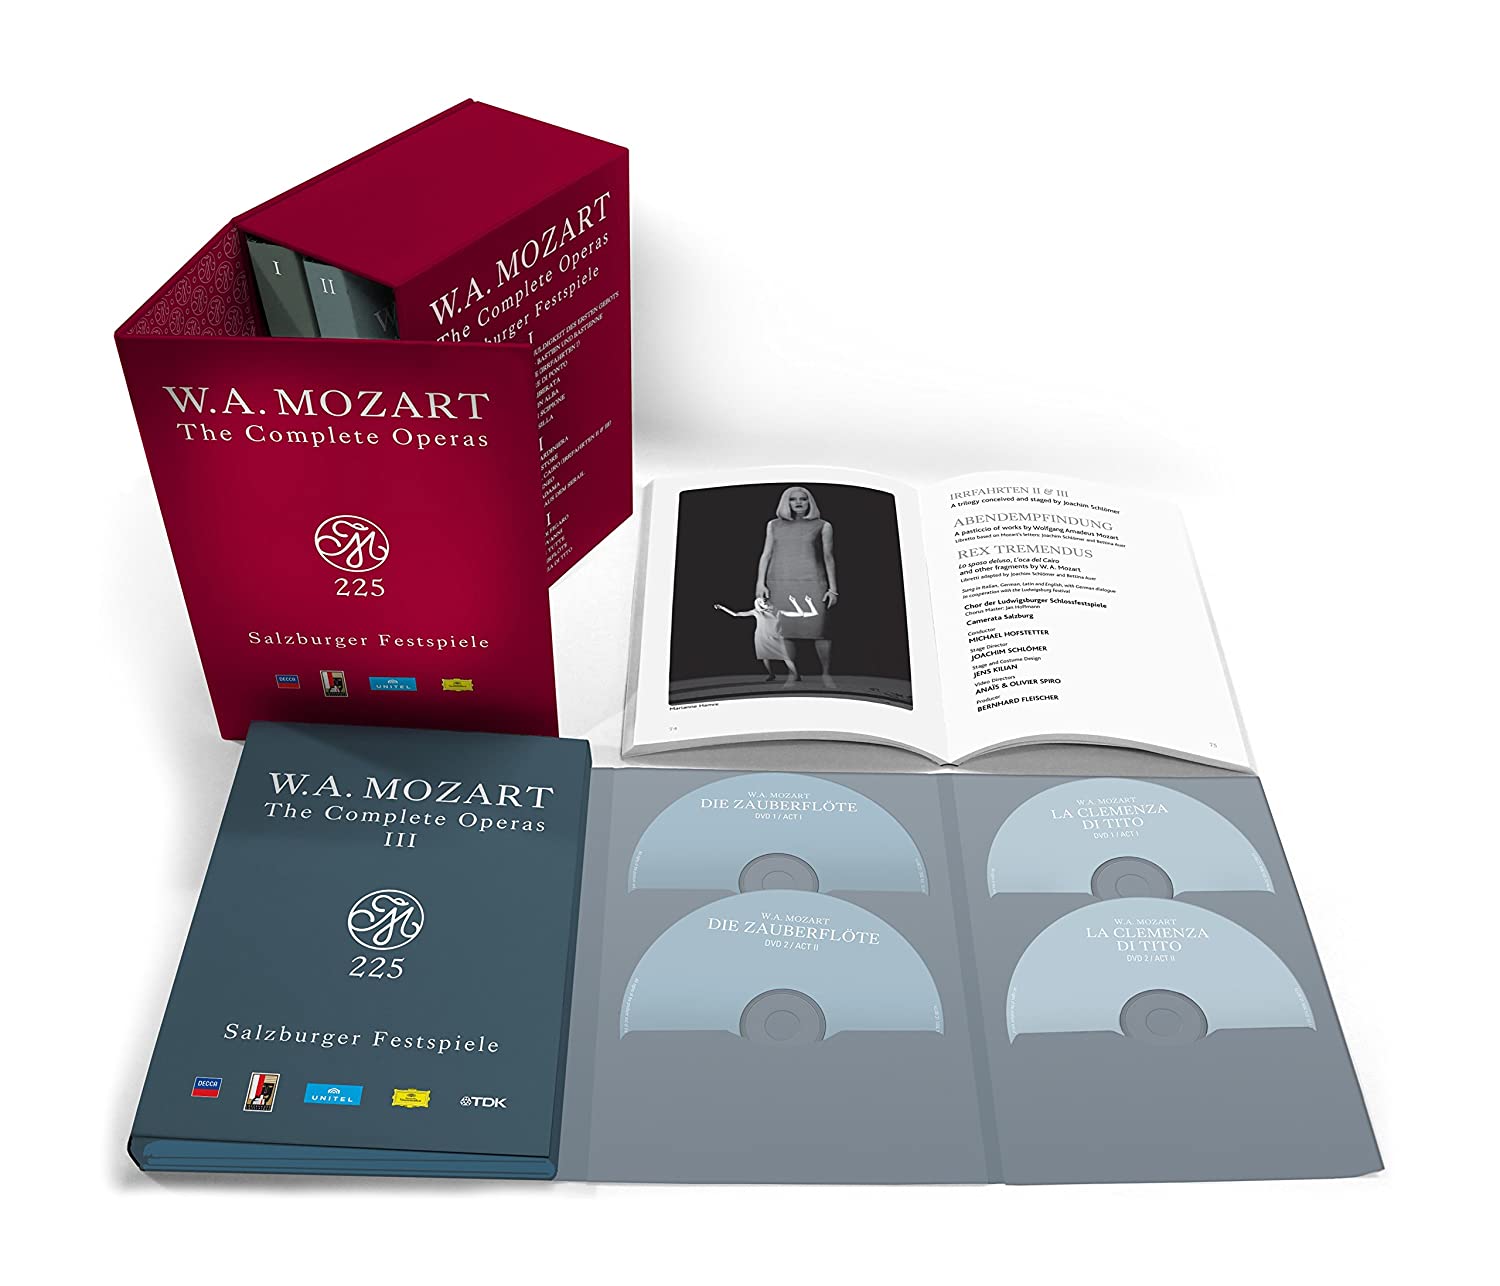 MOZART: THE COMPLETE OPERAS (33 DVDS)